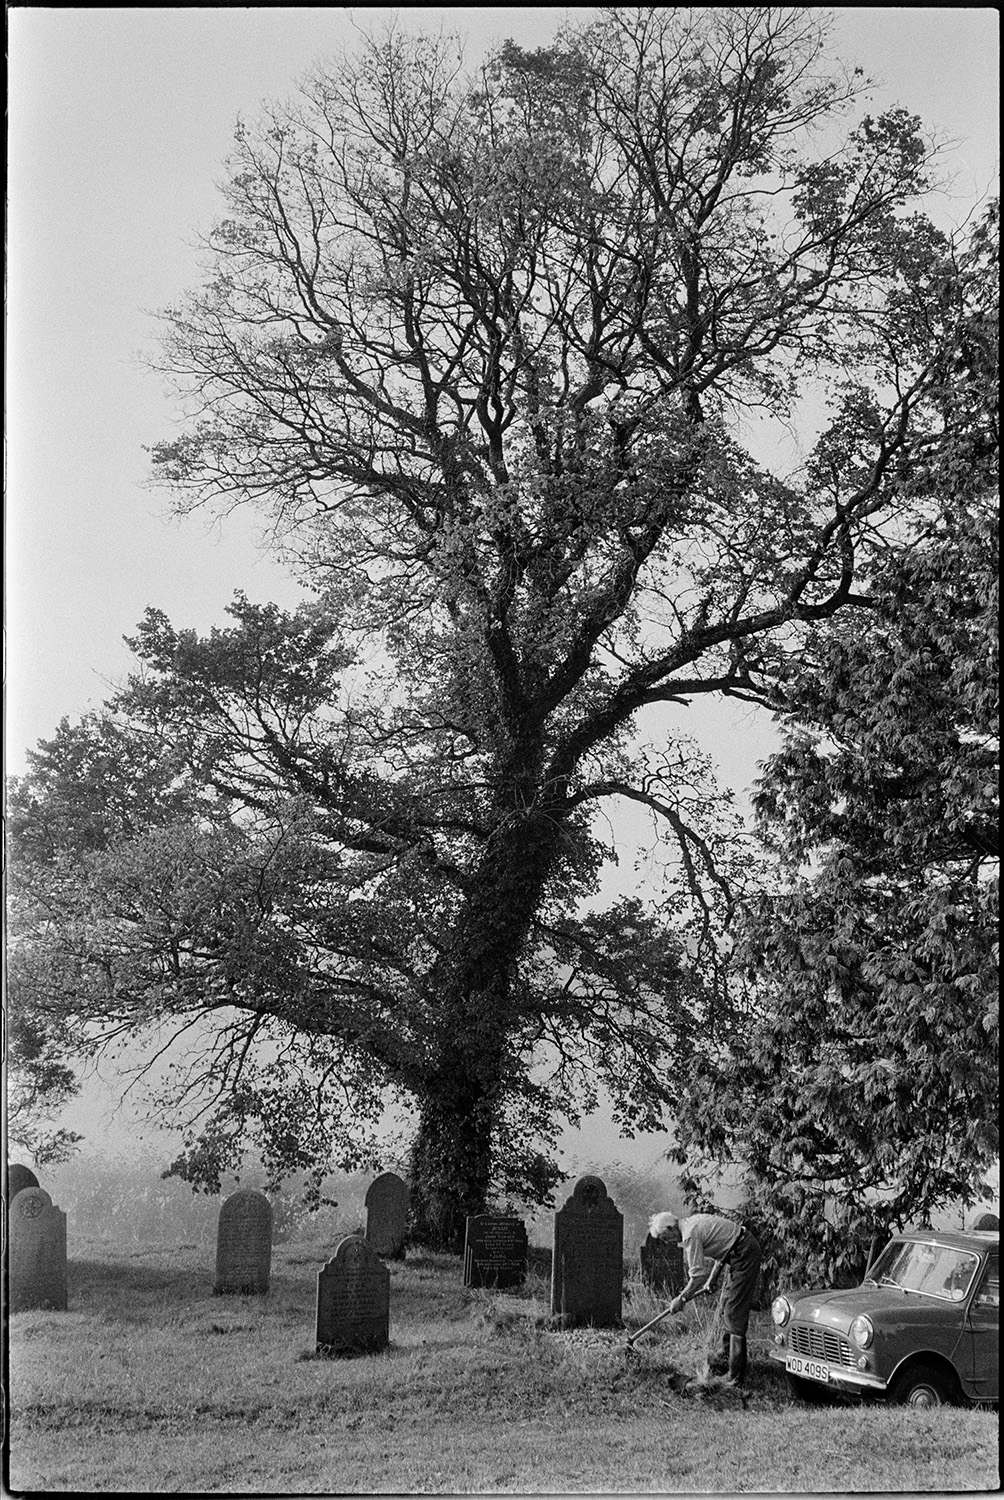 Elm tree in graveyard. 
[A man tending to a grave in Iddesleigh Churchyard. An elm tree can be seen behind the gravestones.]